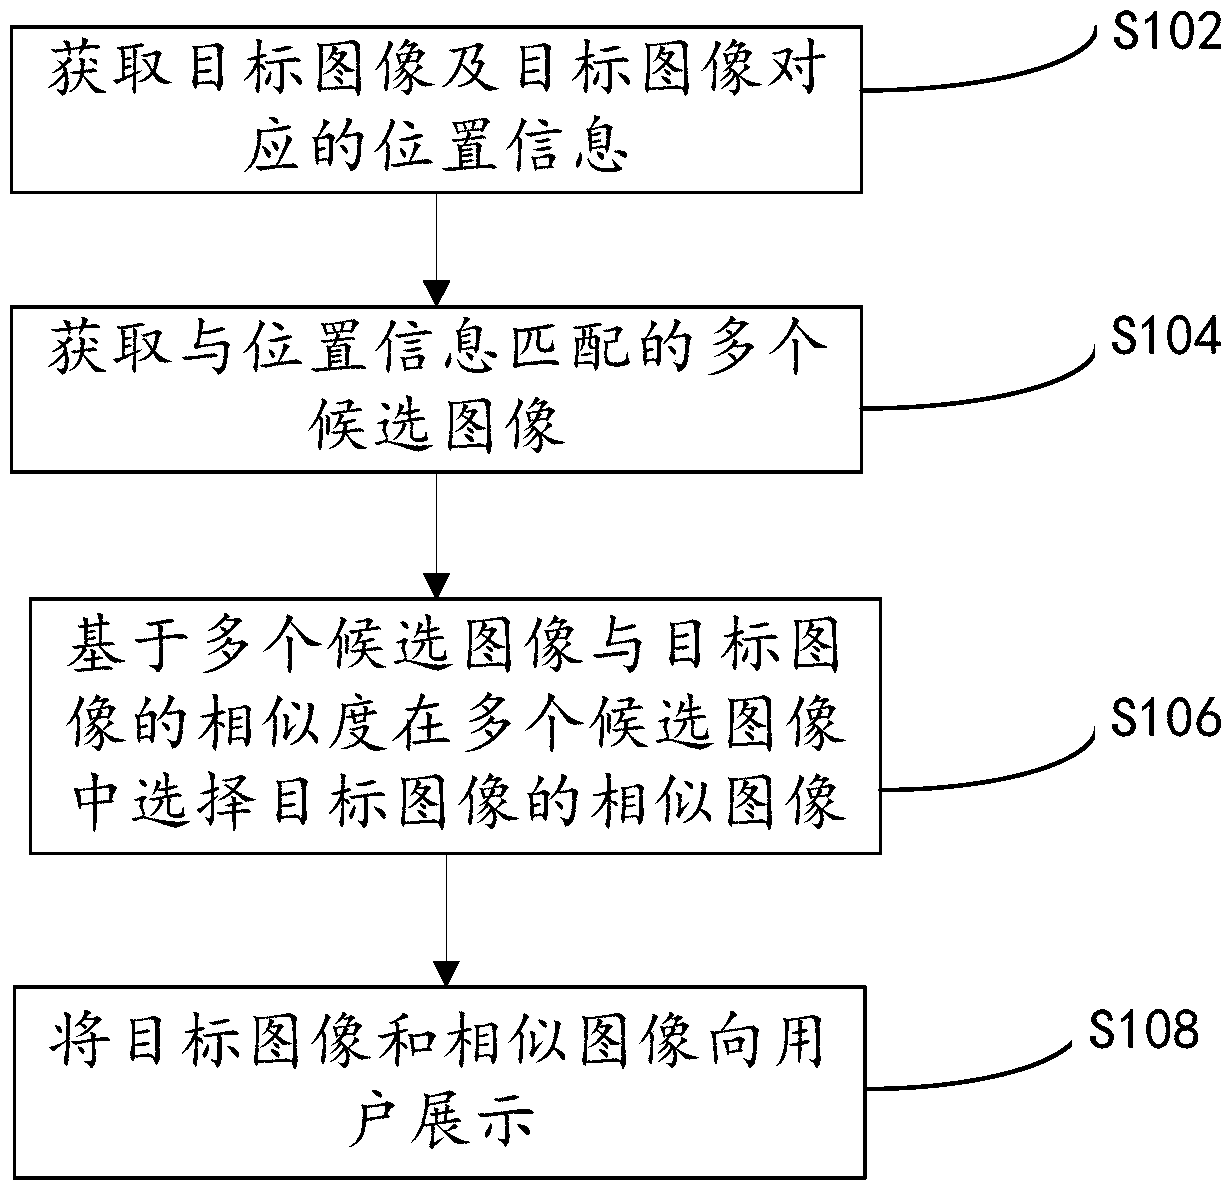 A method and apparatus for selecting similar images